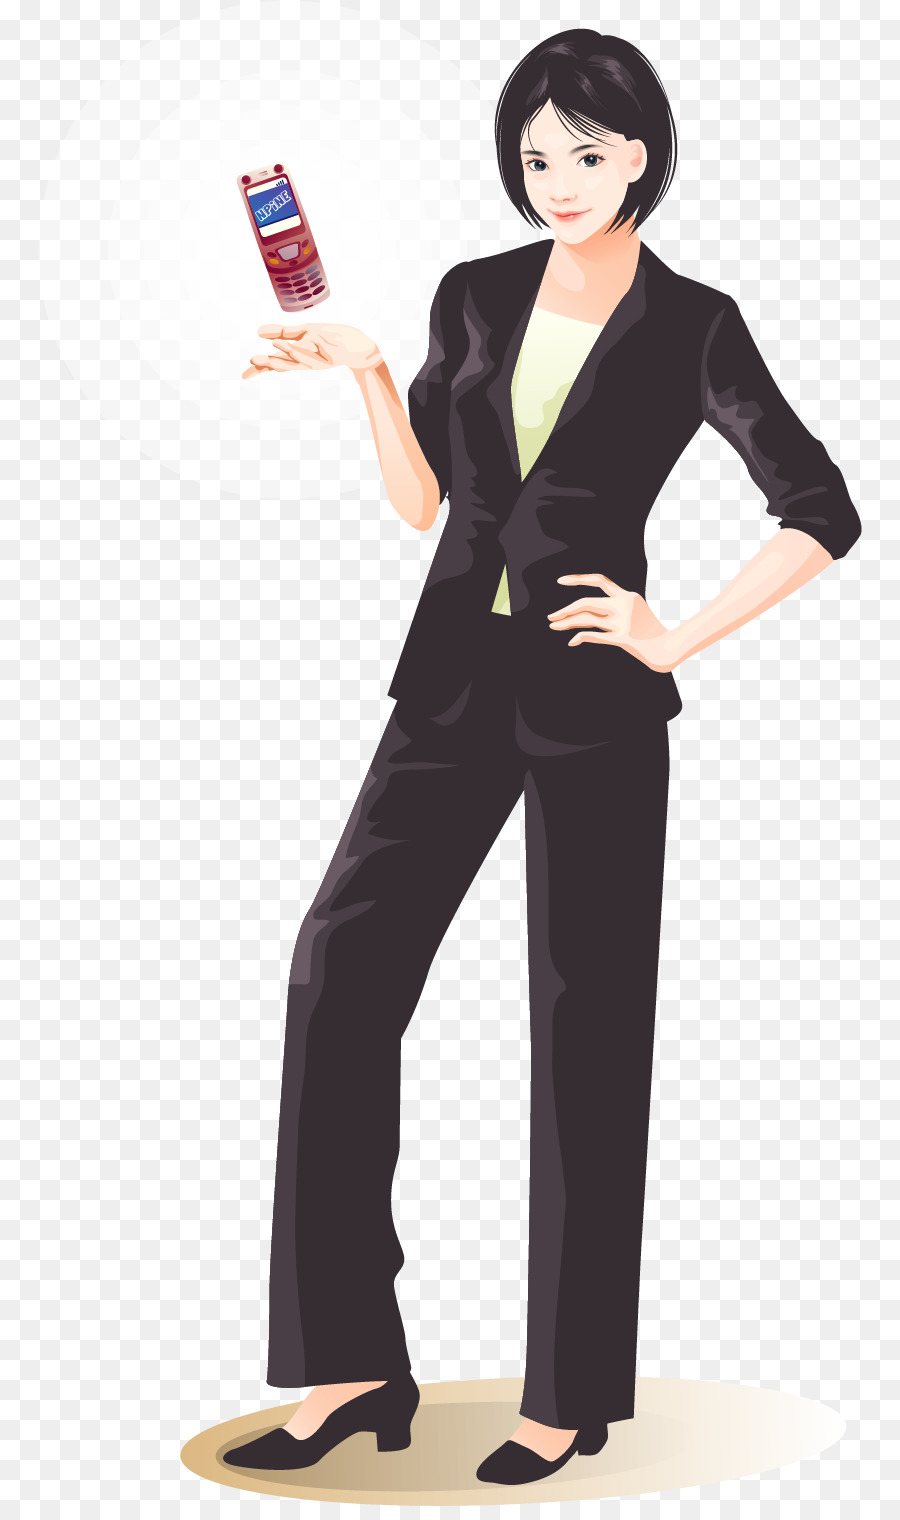 Clip art - Vector Hand-painted Business Woman png download - 824*1506 - Free Transparent  png Download.